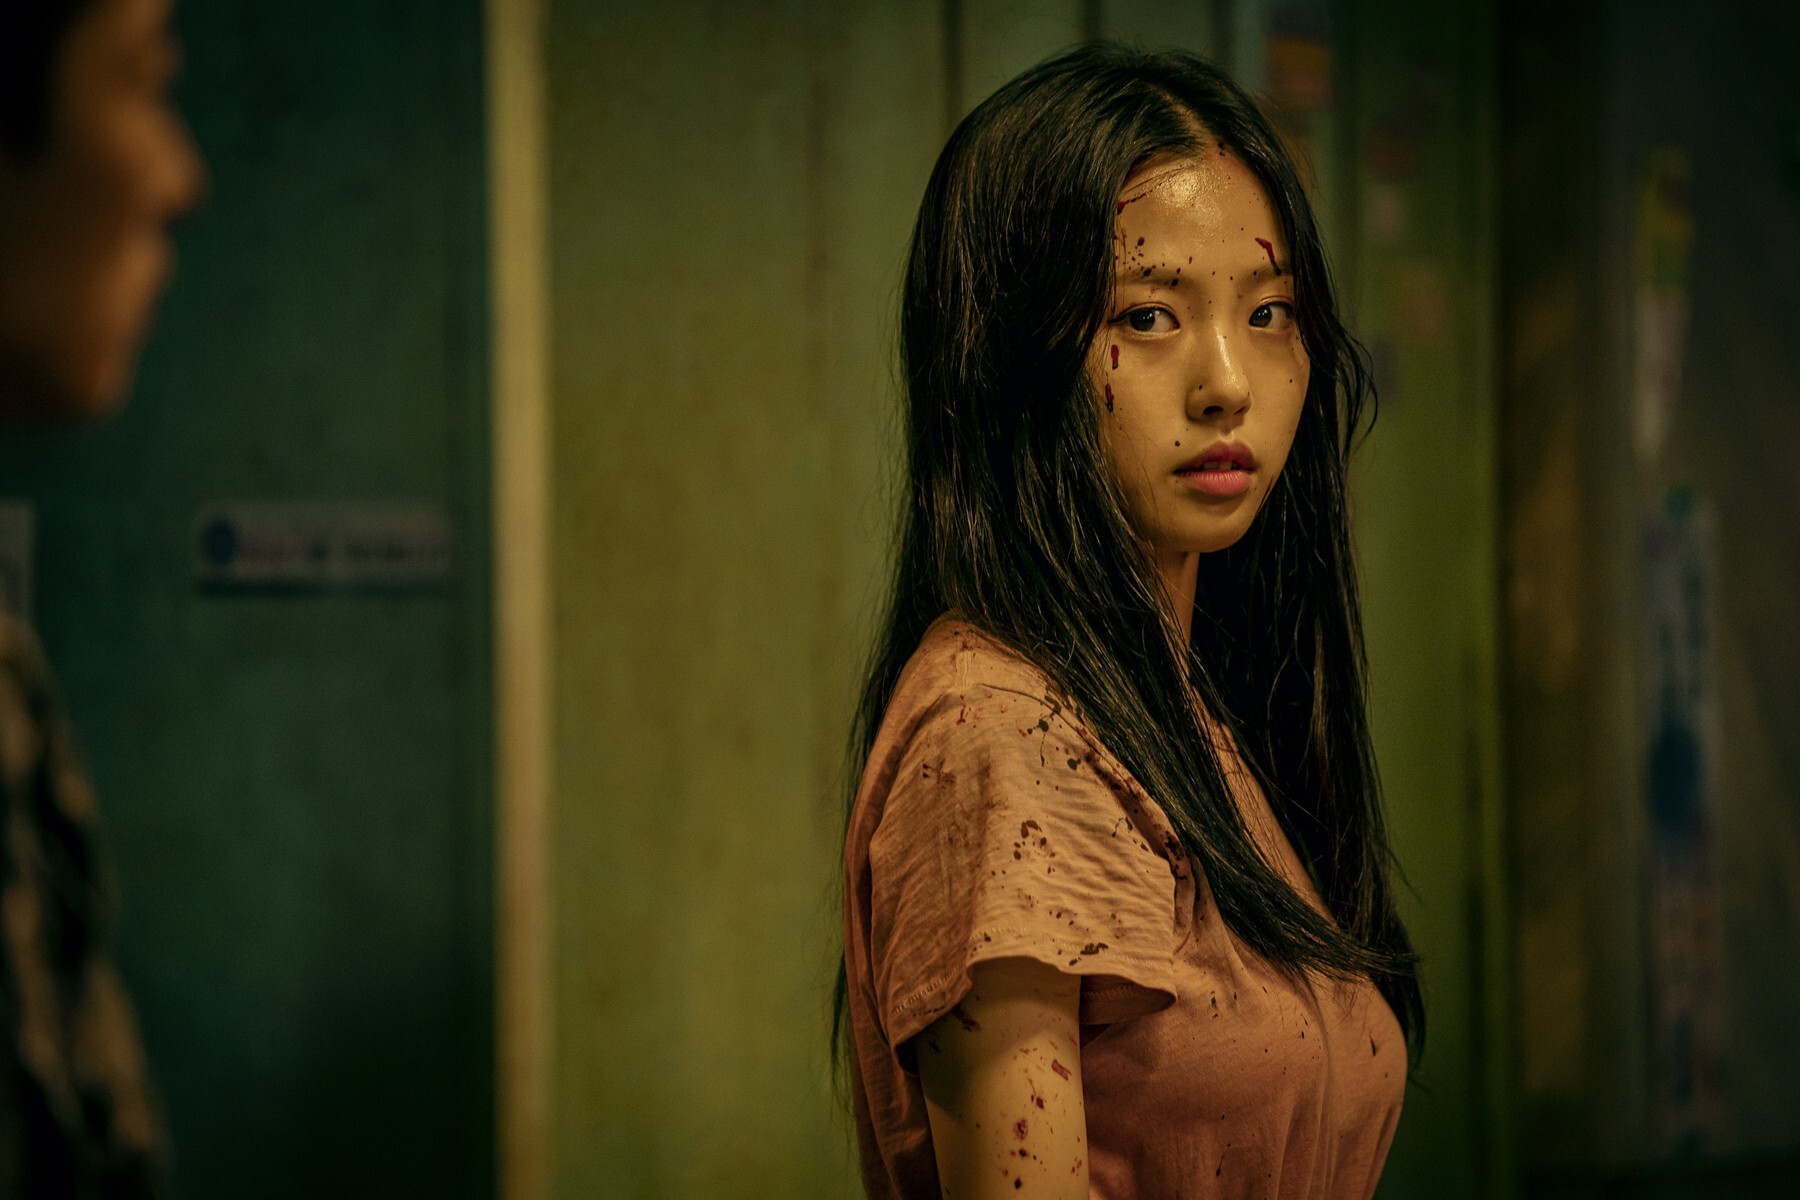 PICK: Top 7 Works of Bae Doo Na, the Actress Trusted by Netflix